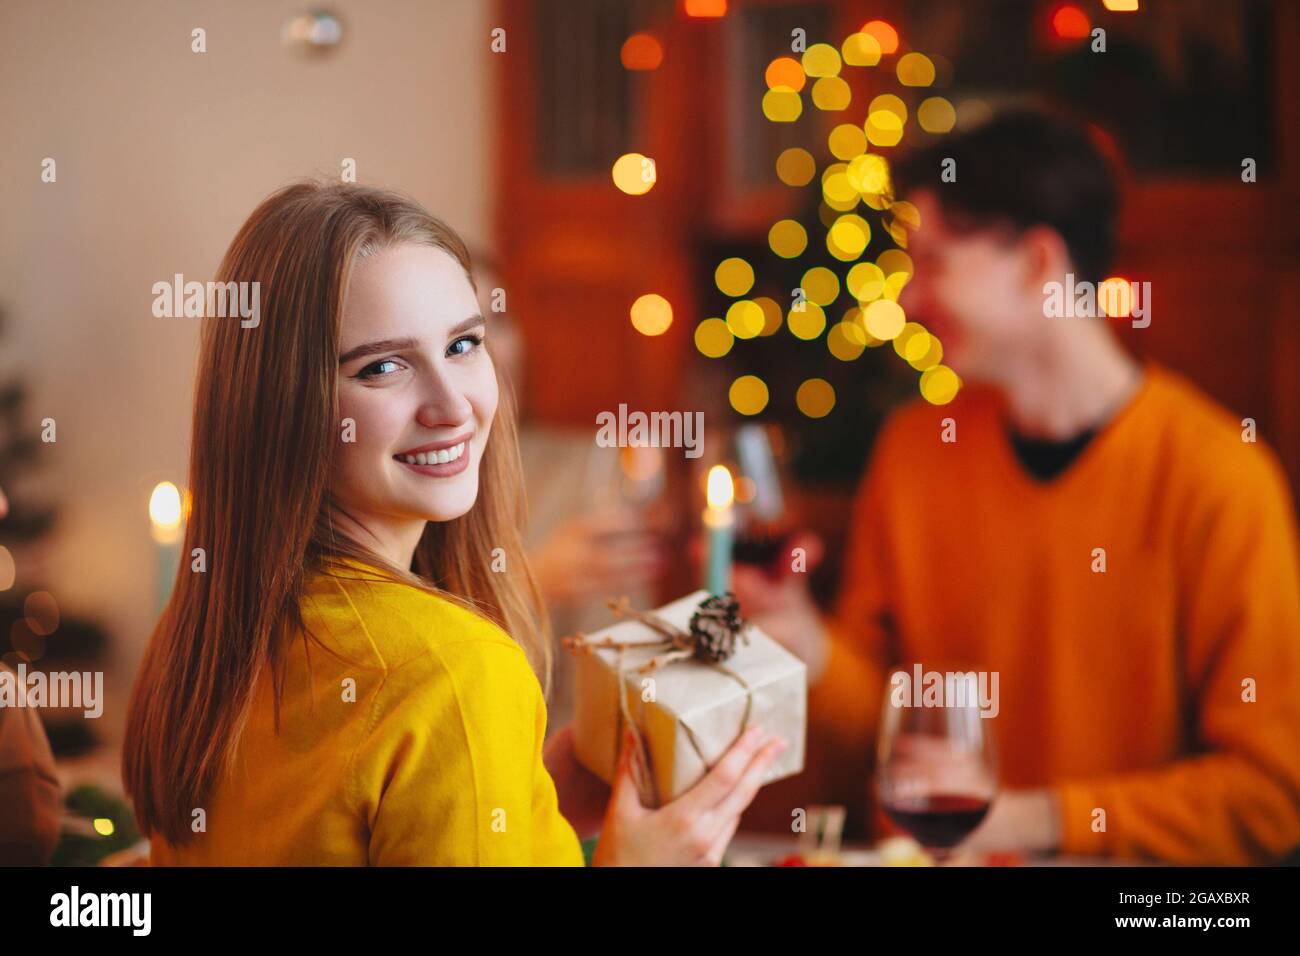 Happy smiling blond woman giving wrapped gift to friend while sitting at table and celebrating Christmas together Stock Photo